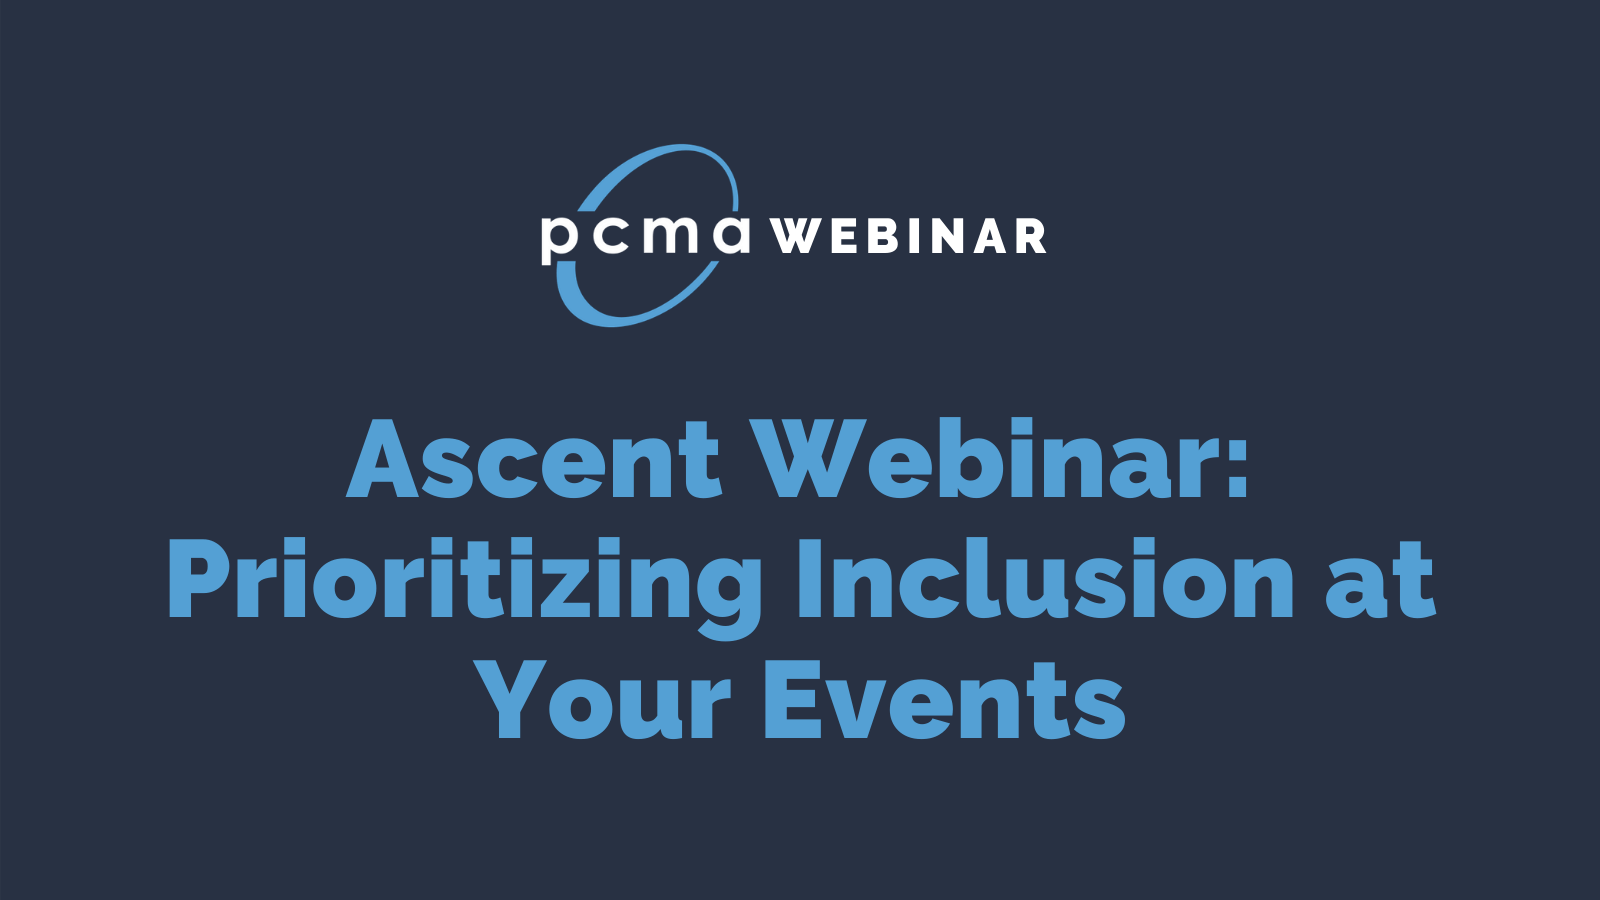 Ascent Webinar: Prioritizing Inclusion at Your Events